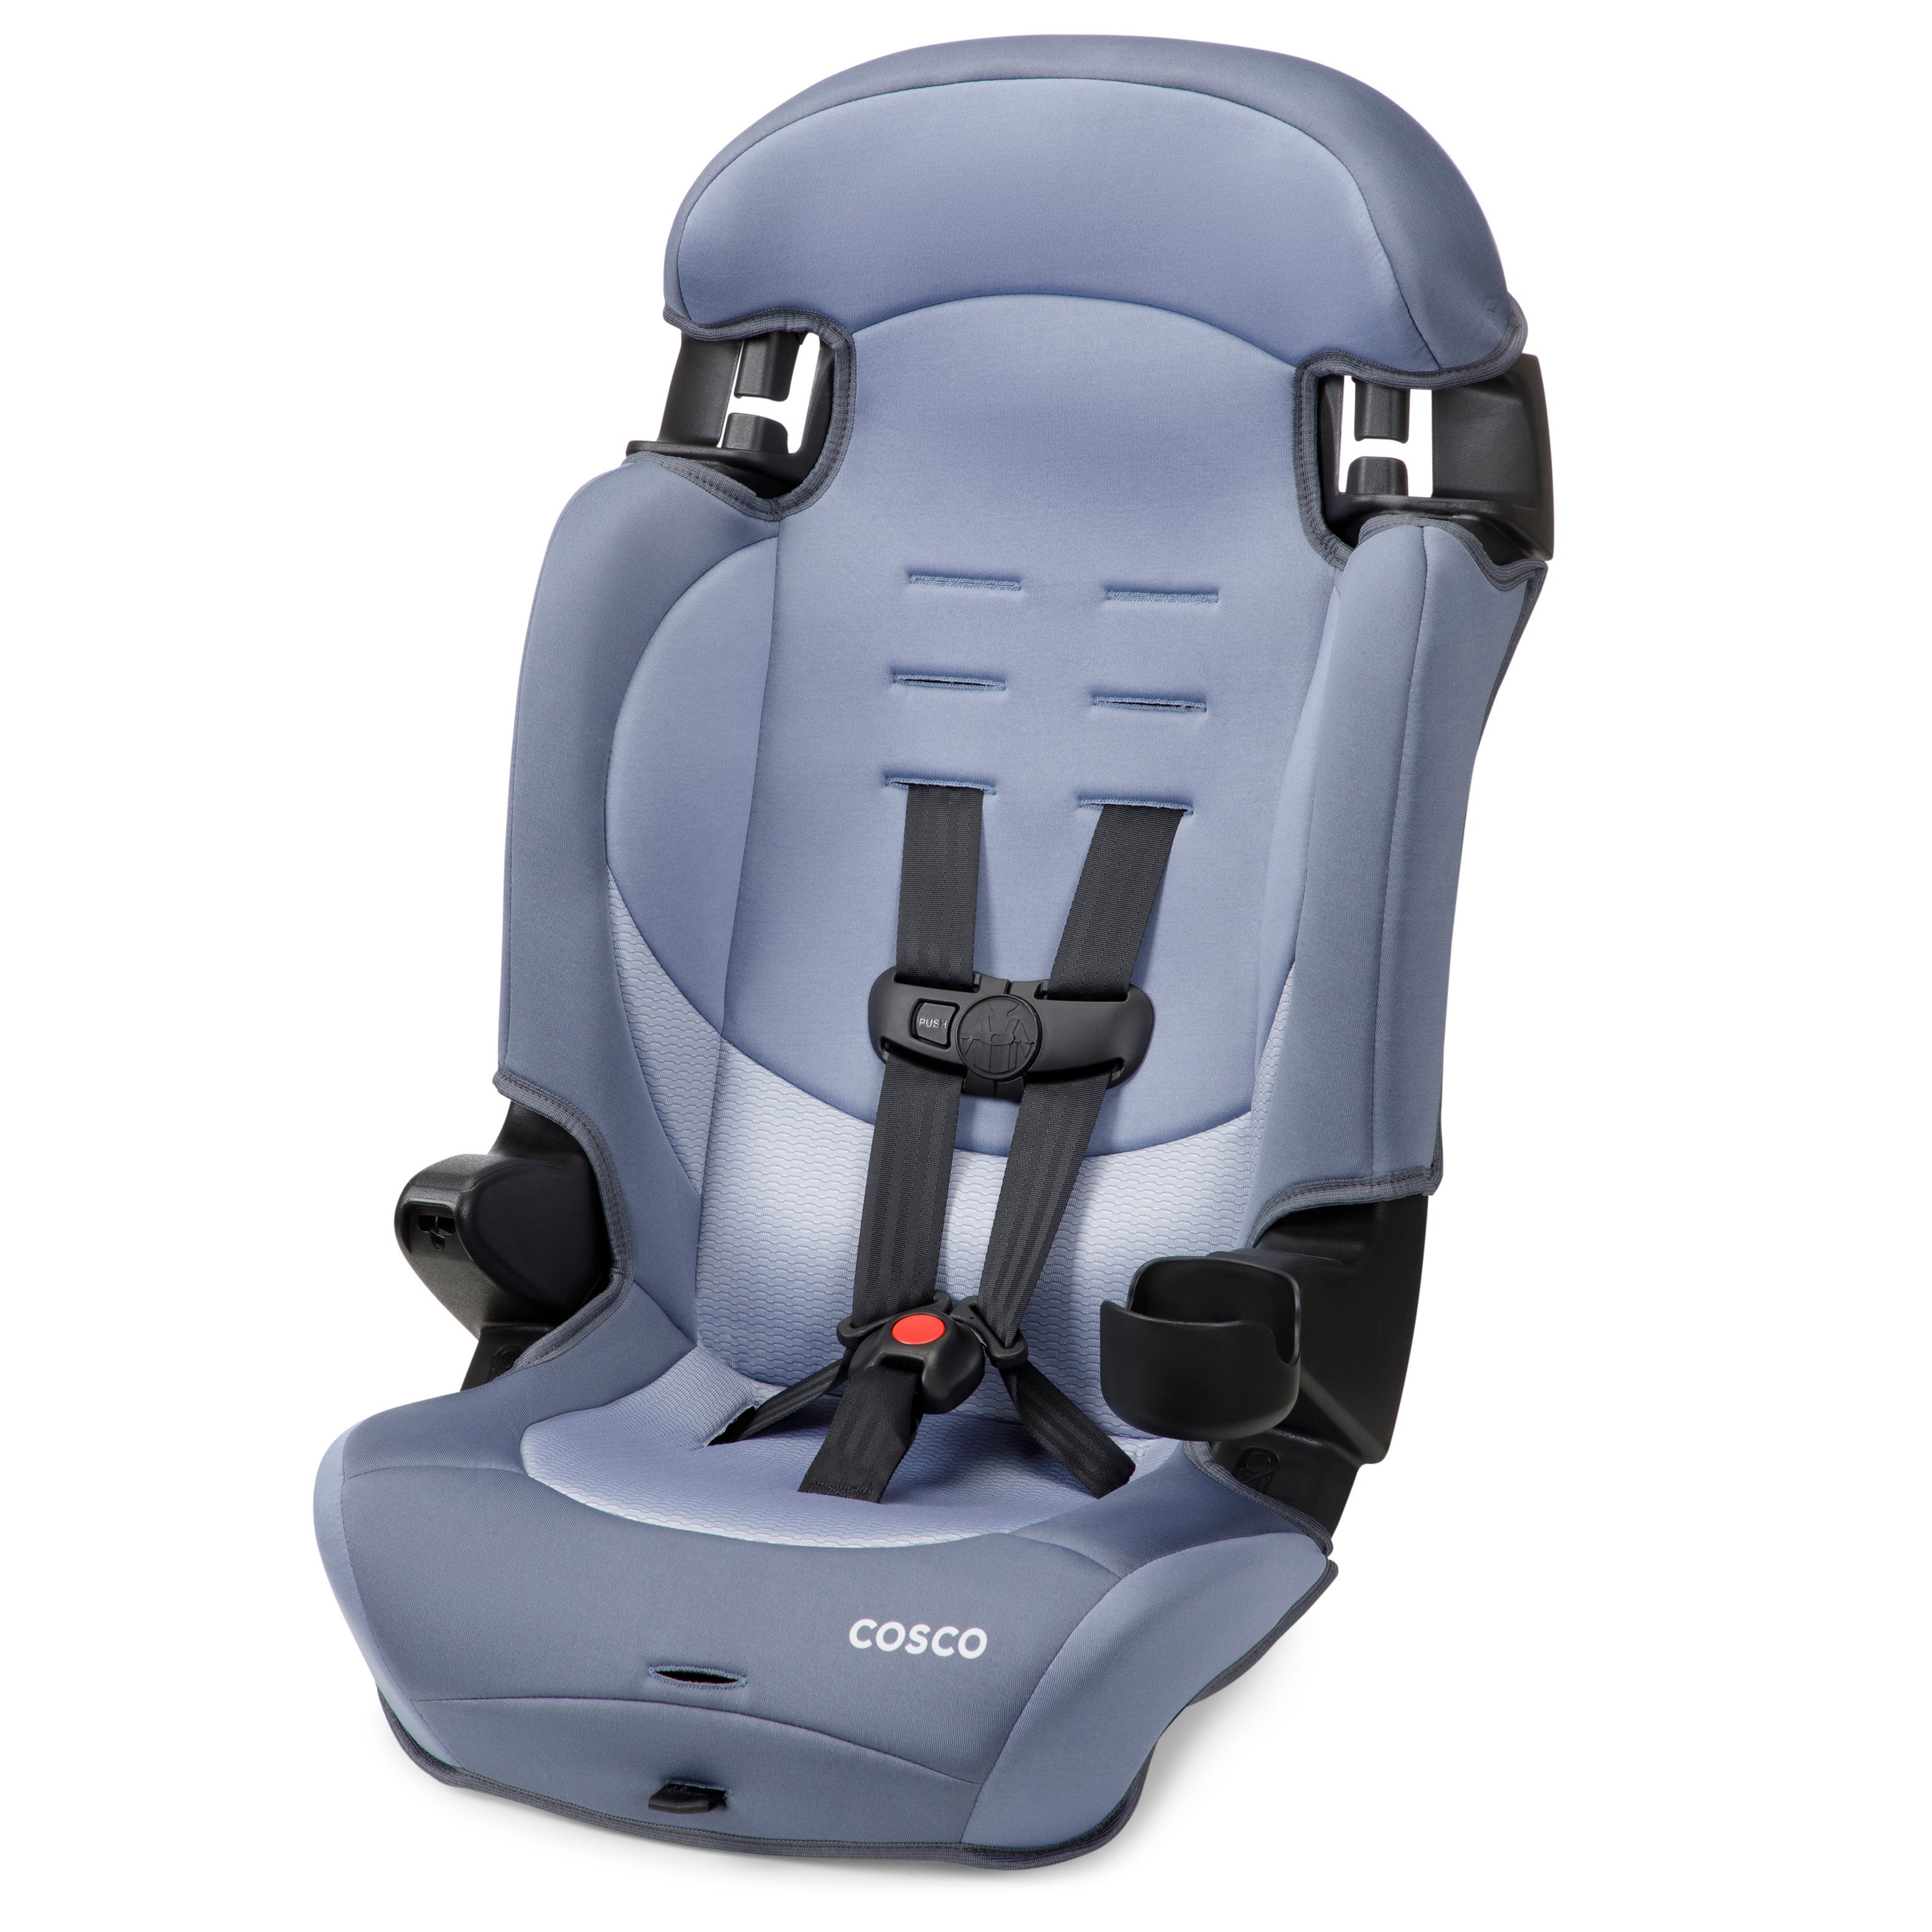 Finale DX 2-in-1 Booster Car Seat Organic Waves